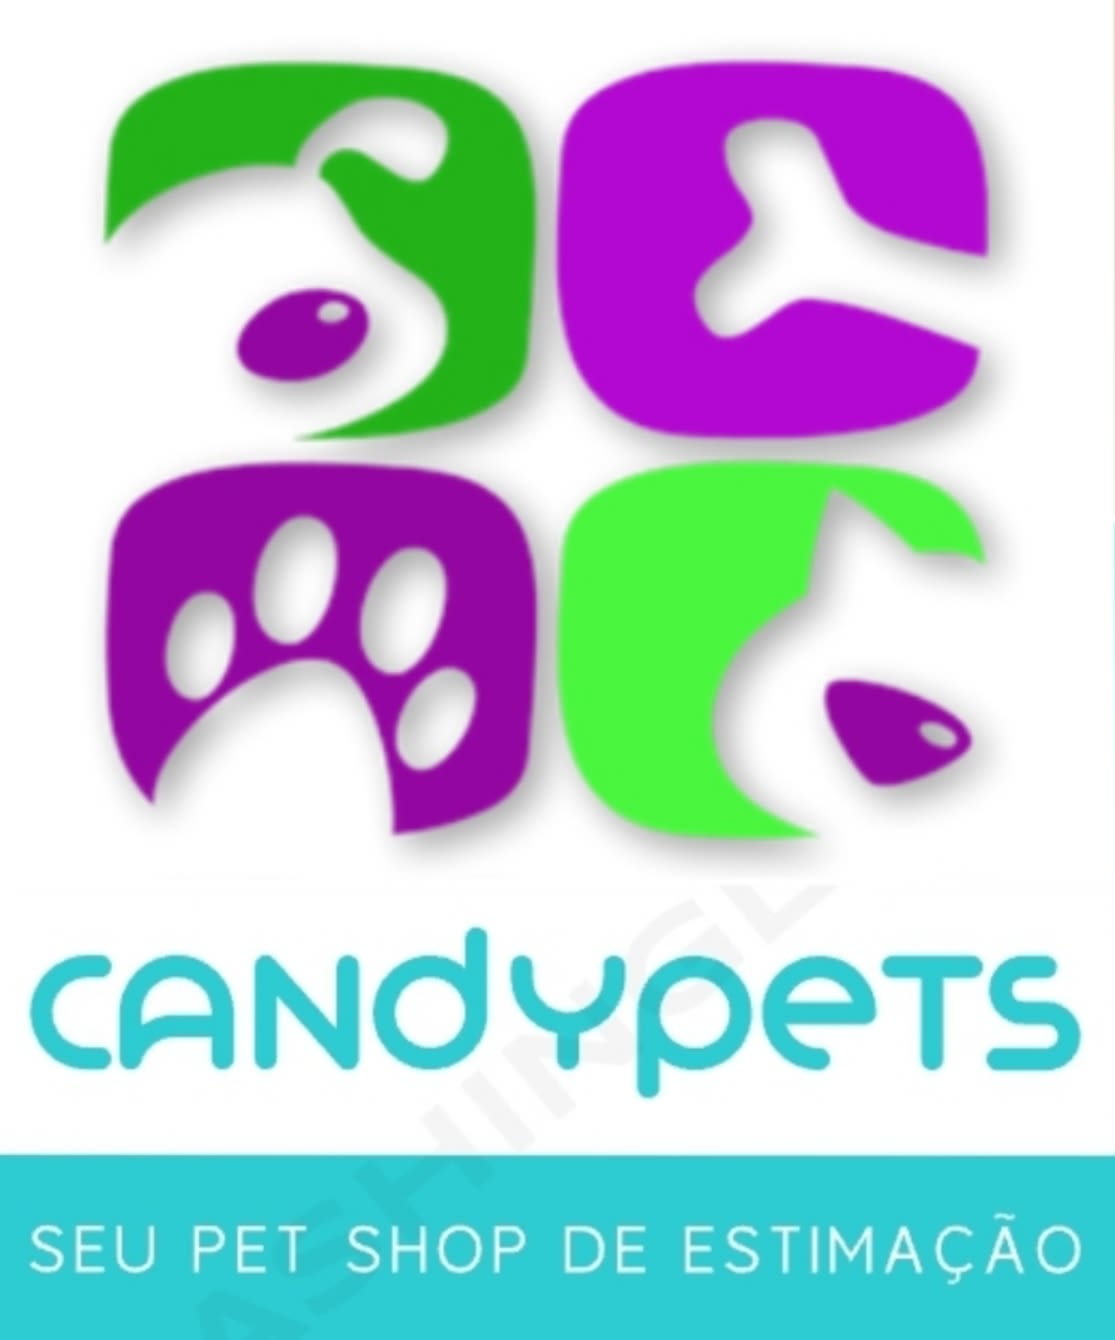 Candypets